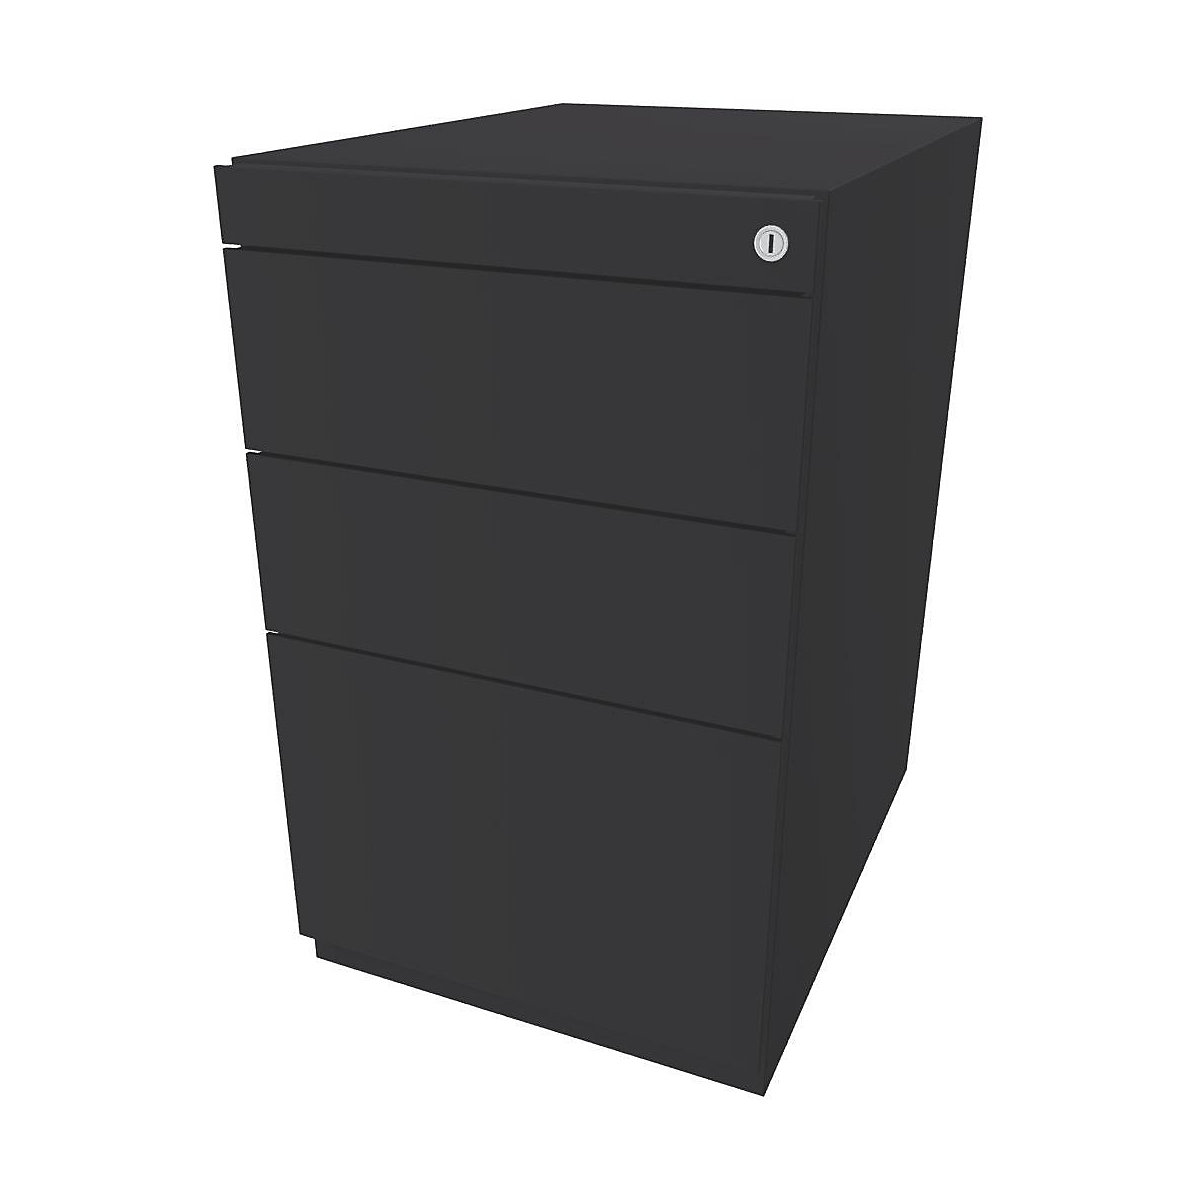 Note™ fixed pedestal, with 2 universal drawers, 1 suspension file drawer – BISLEY